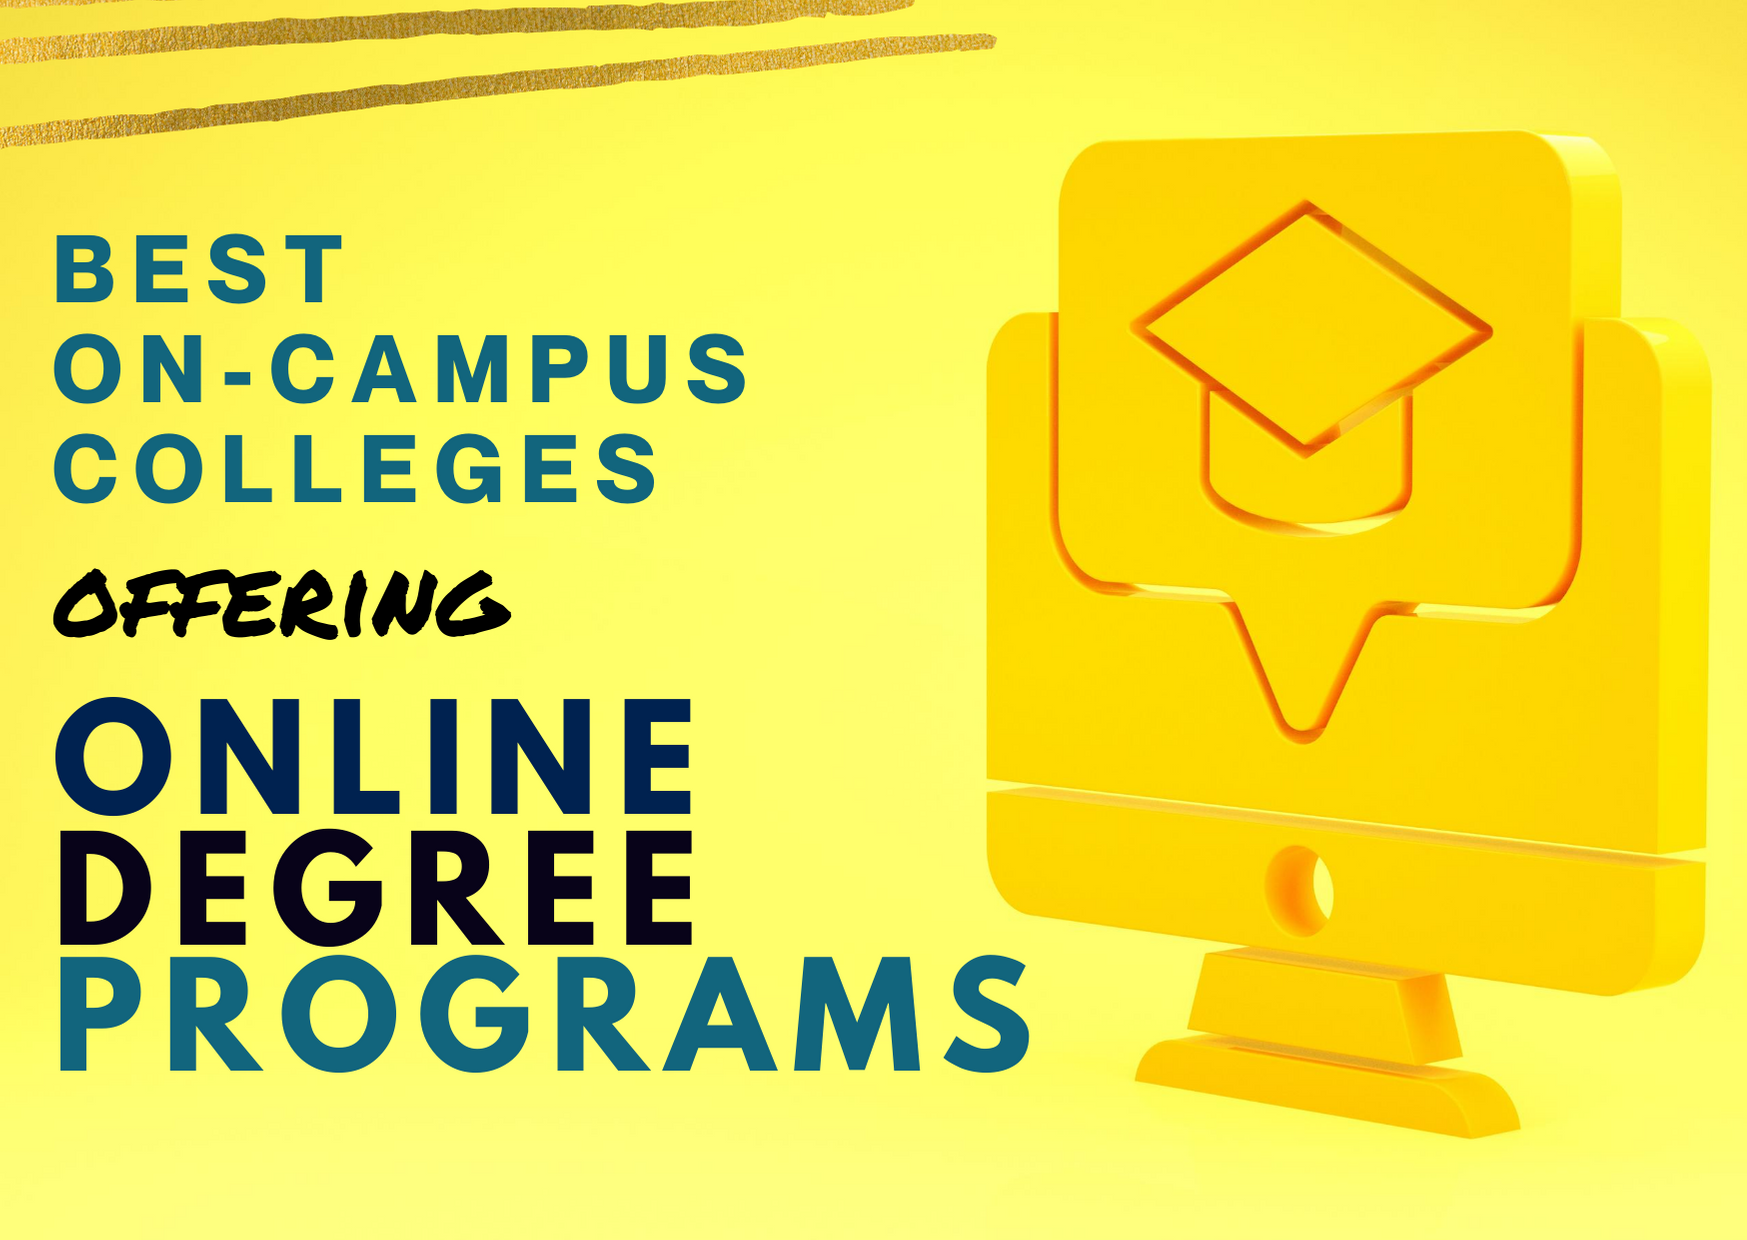 Best OnCampus Colleges that Offer Online Degree Programs